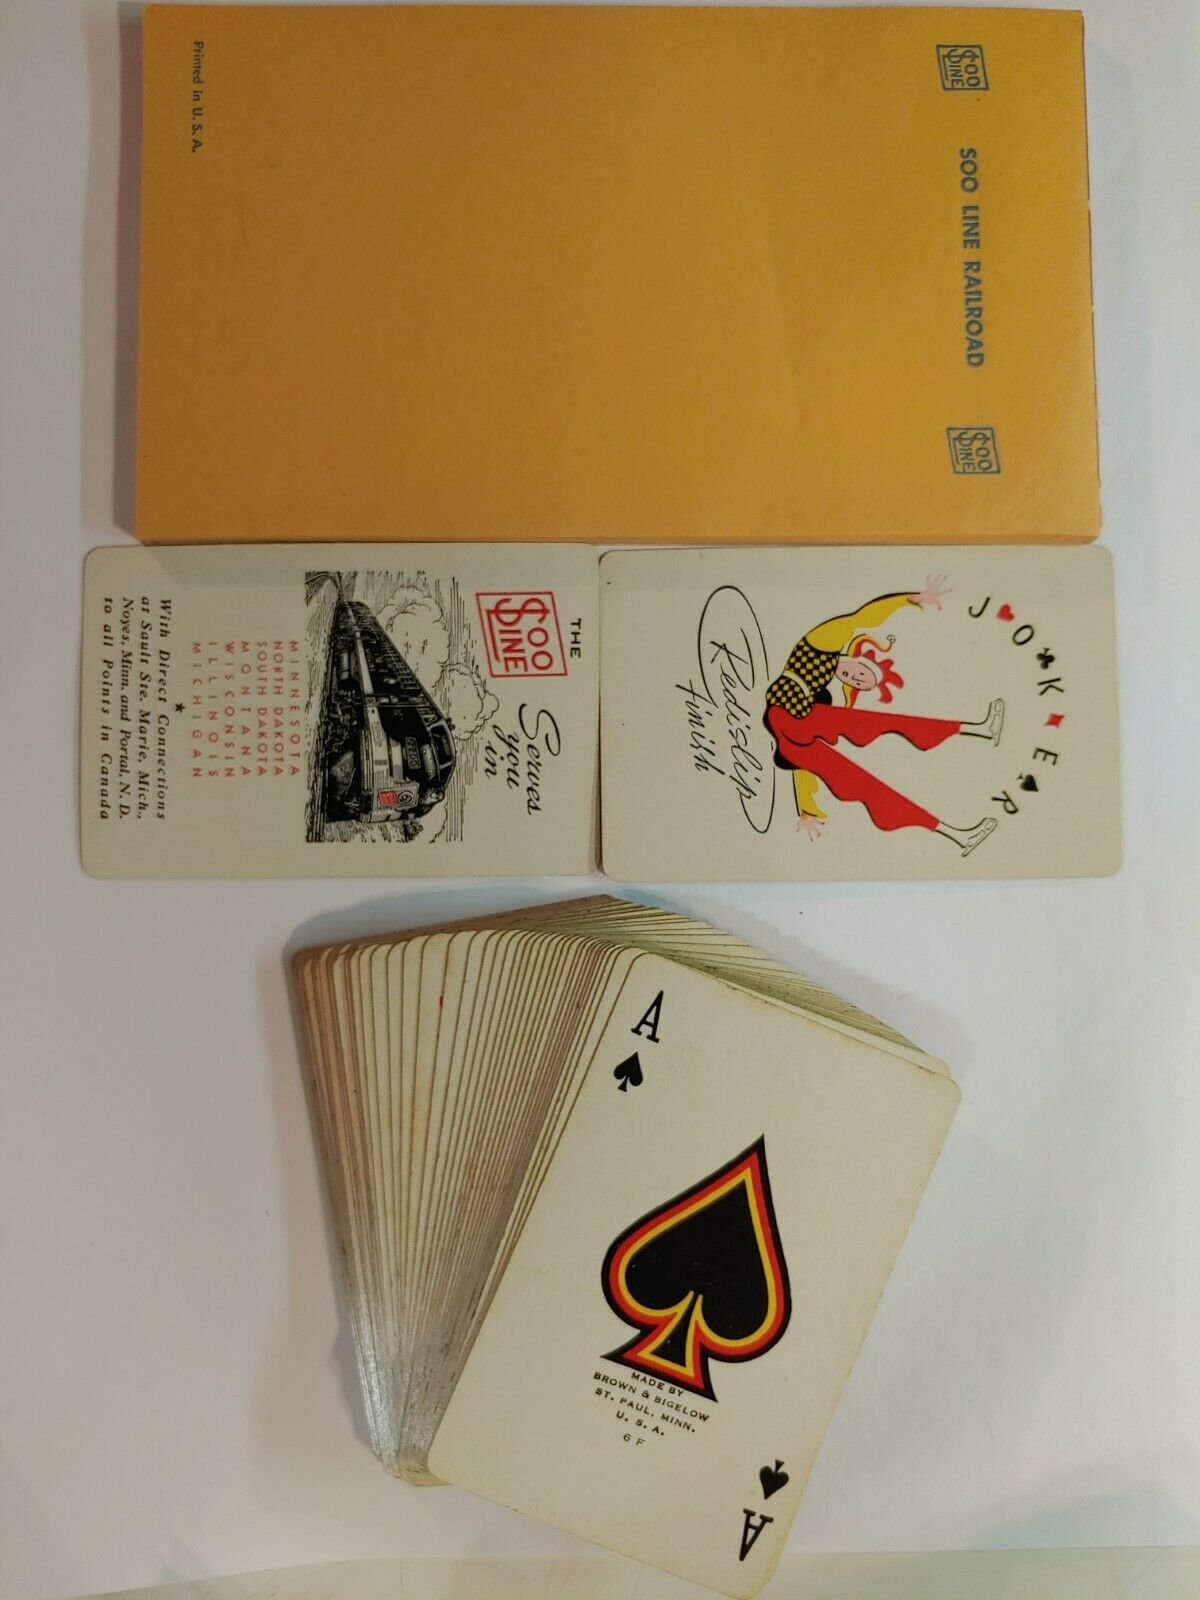 Deck Of Soo Line Railroad Playing Cards And Note Pad